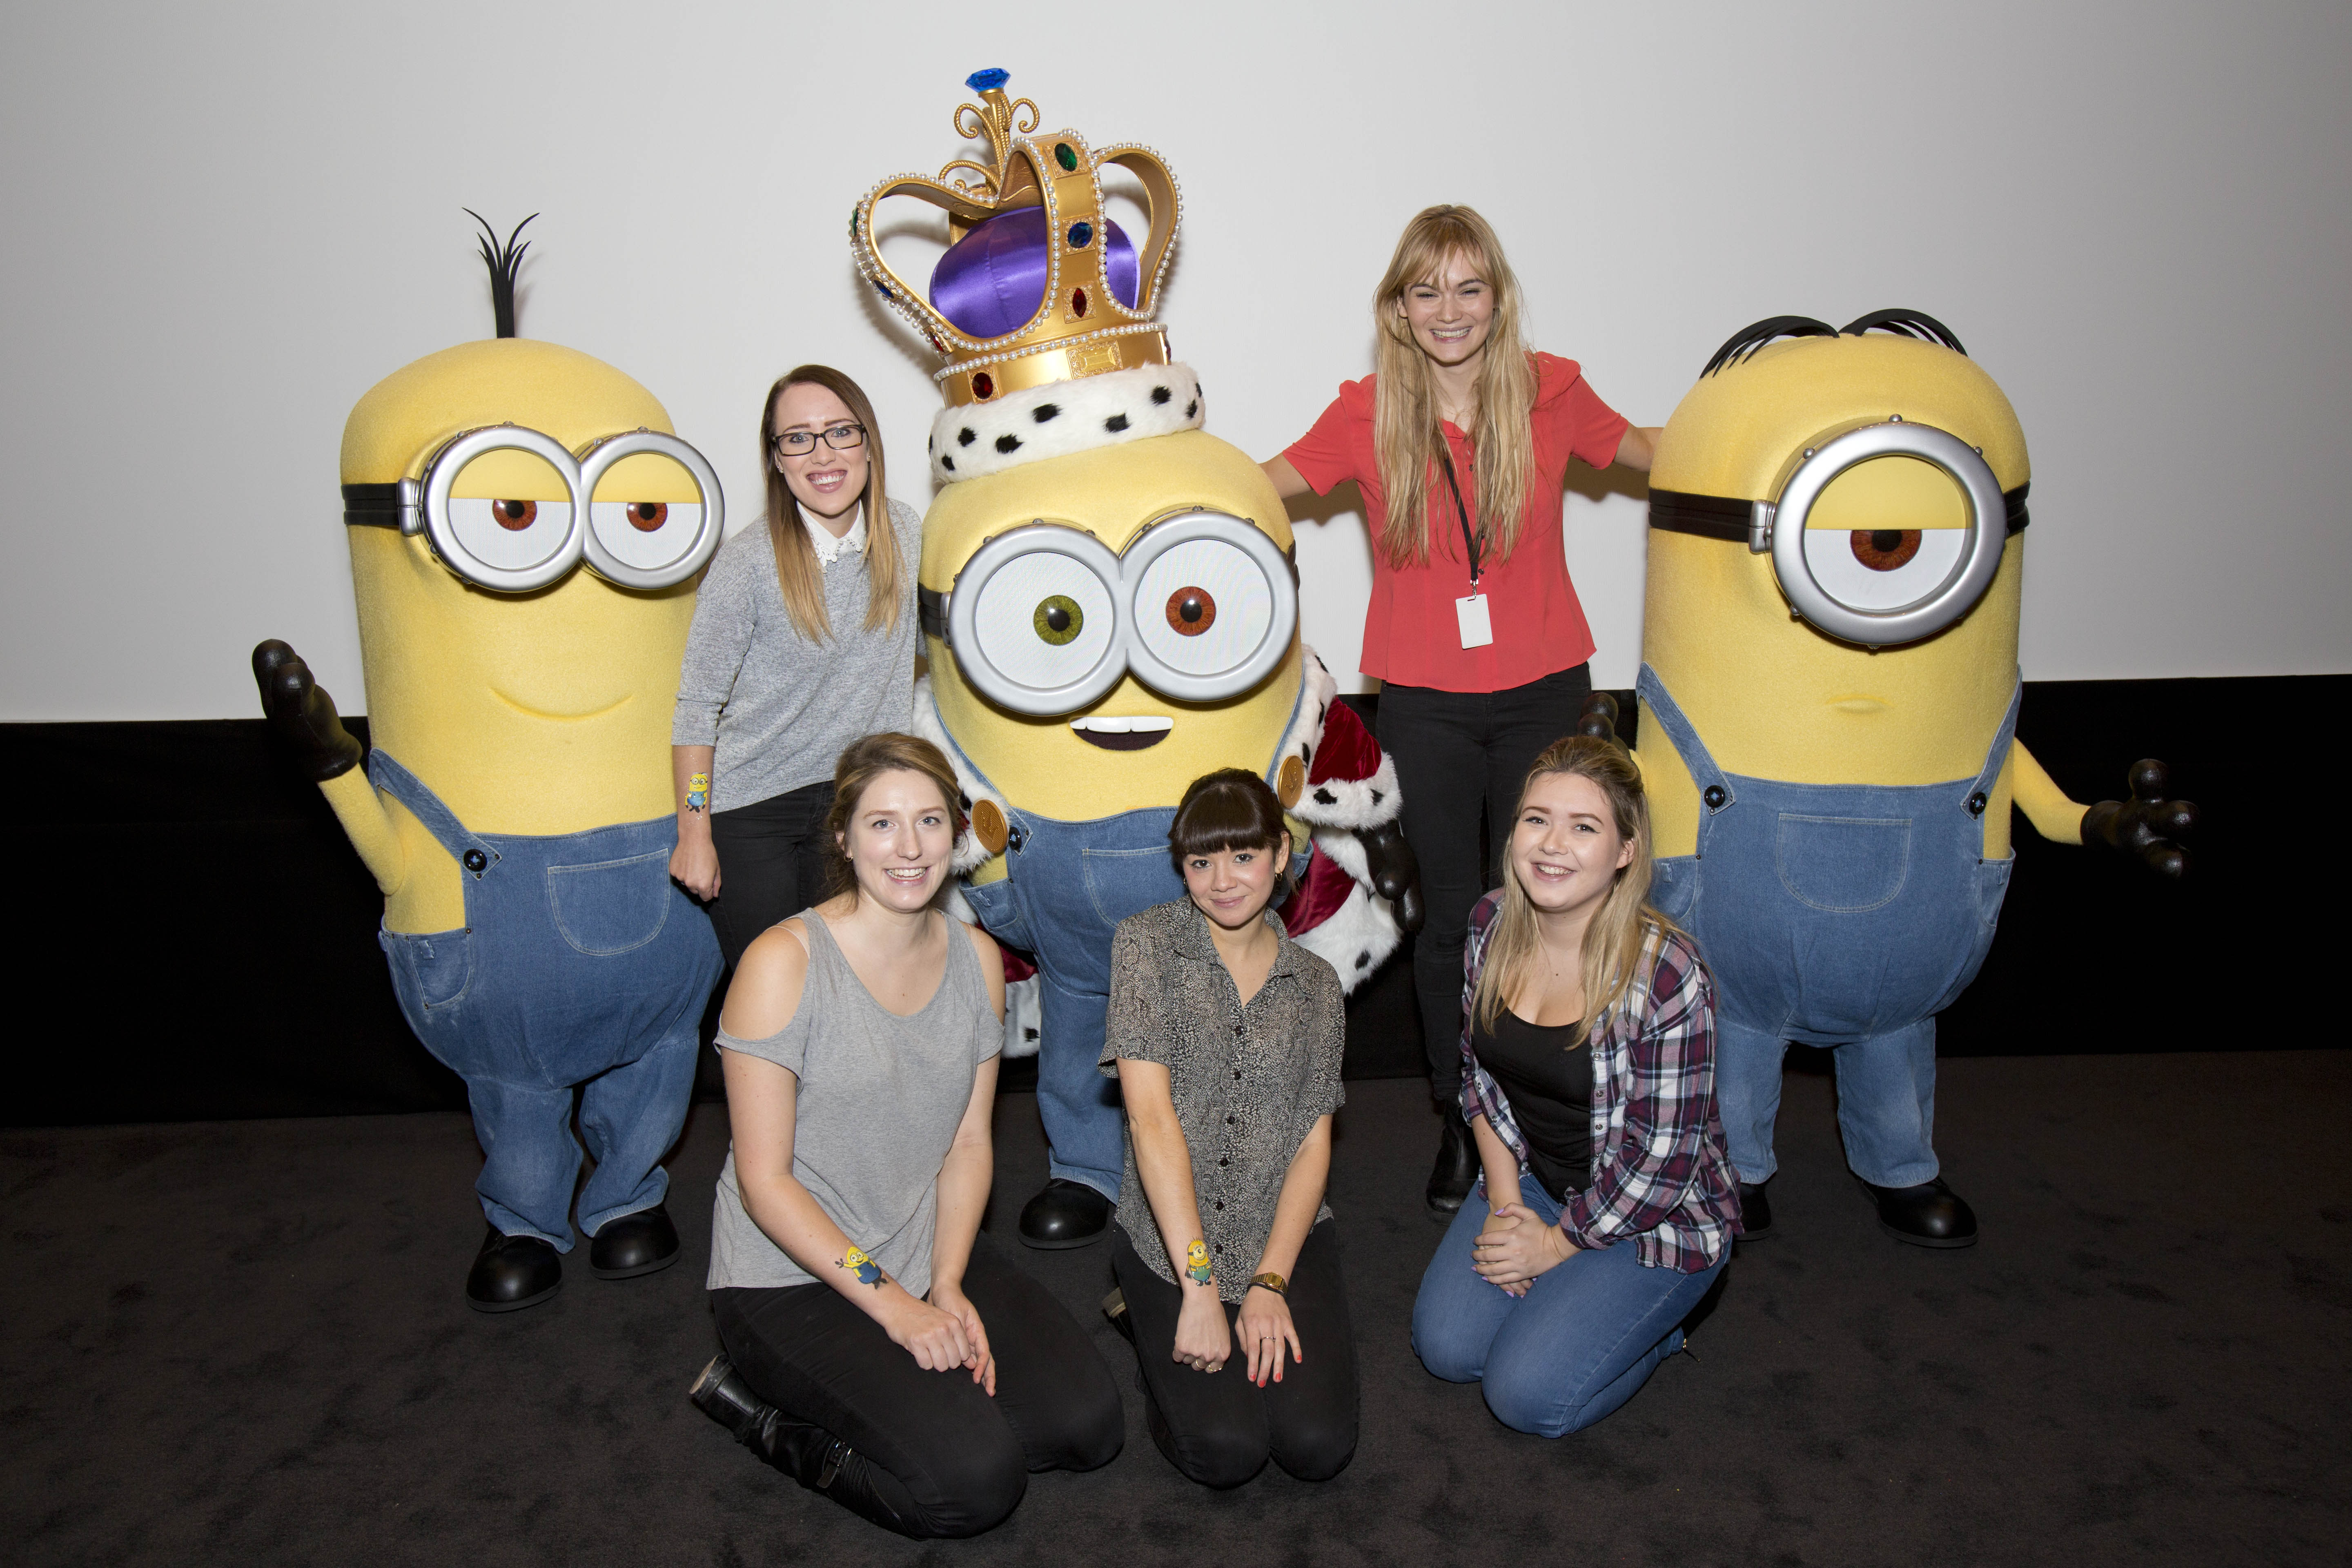 UNIVERSAL FIMS 'MINIONS' DVD PREMIERE AT SOHO HOTEL TODAY. PIX.Tim Anderson